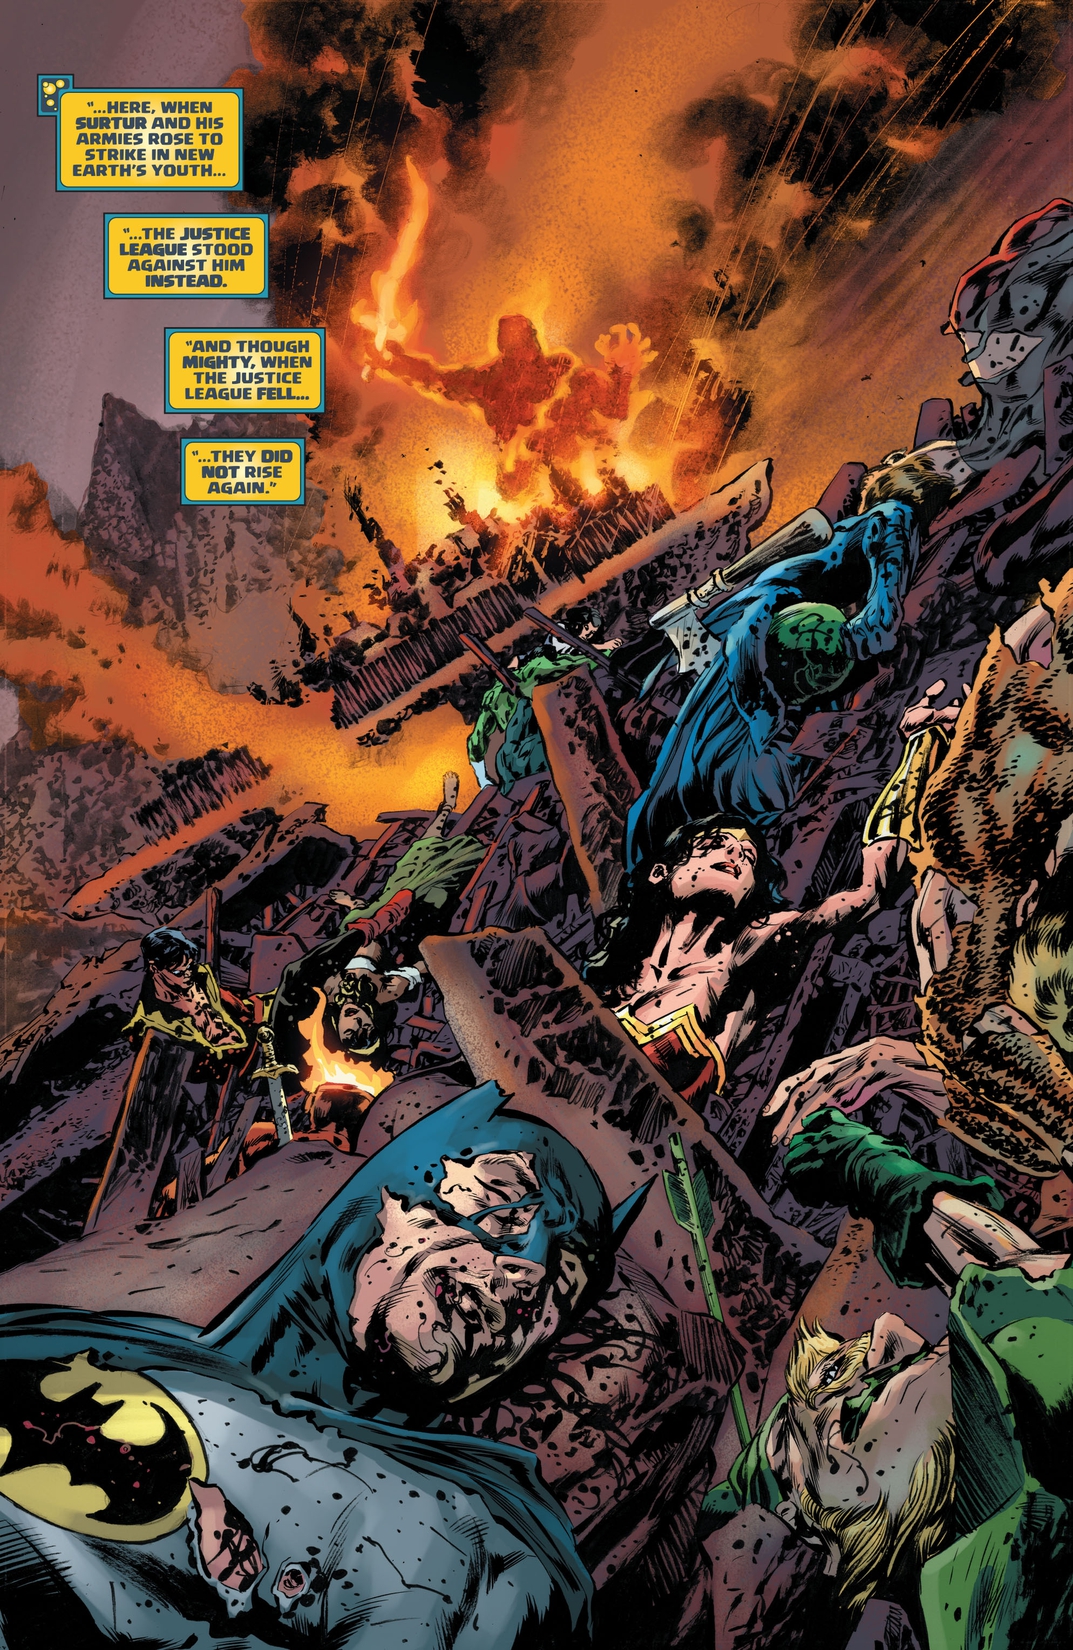 TALES FROM THE DARK MULTIVERSE CRISIS ON INFINITE EARTHS #1 12//15//20